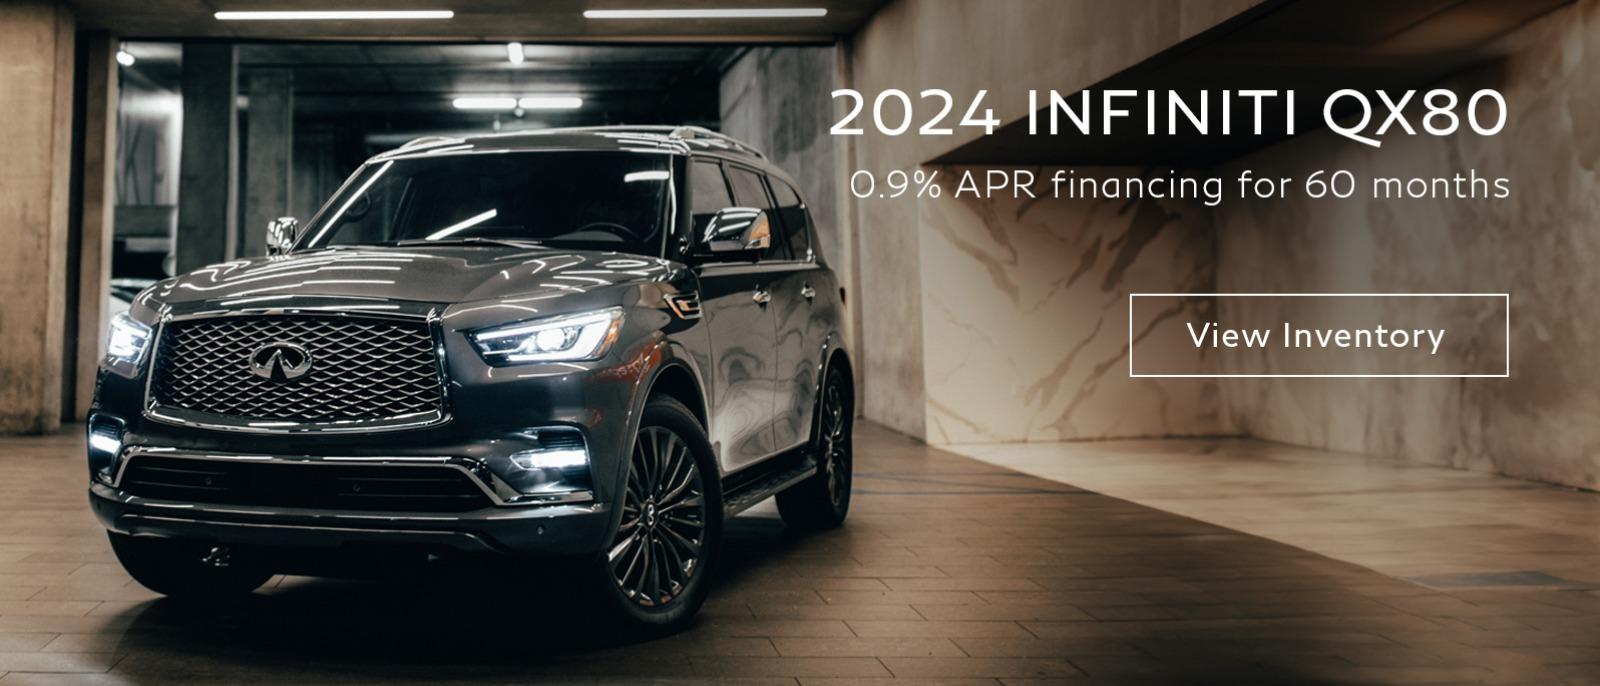 0.9% APR Financing for 60 Months on 2024 QX80